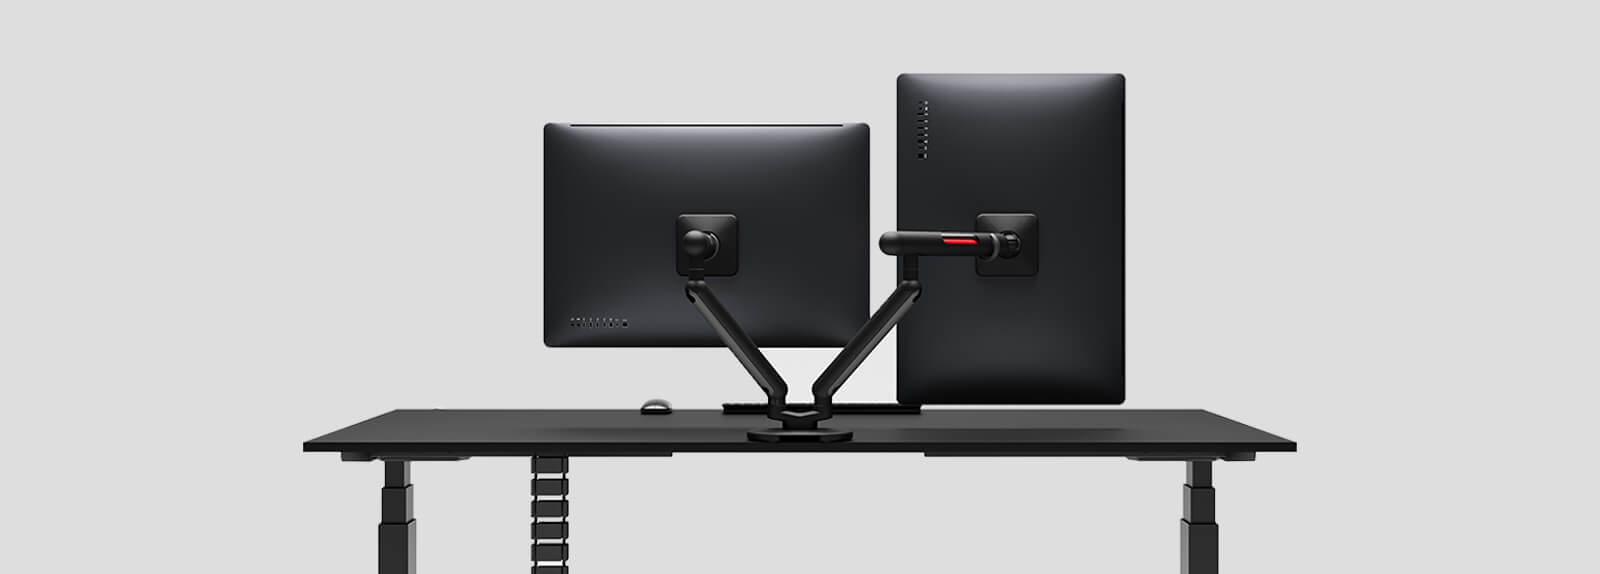 Saber Dual Arm Monitor Desk Mount Stand